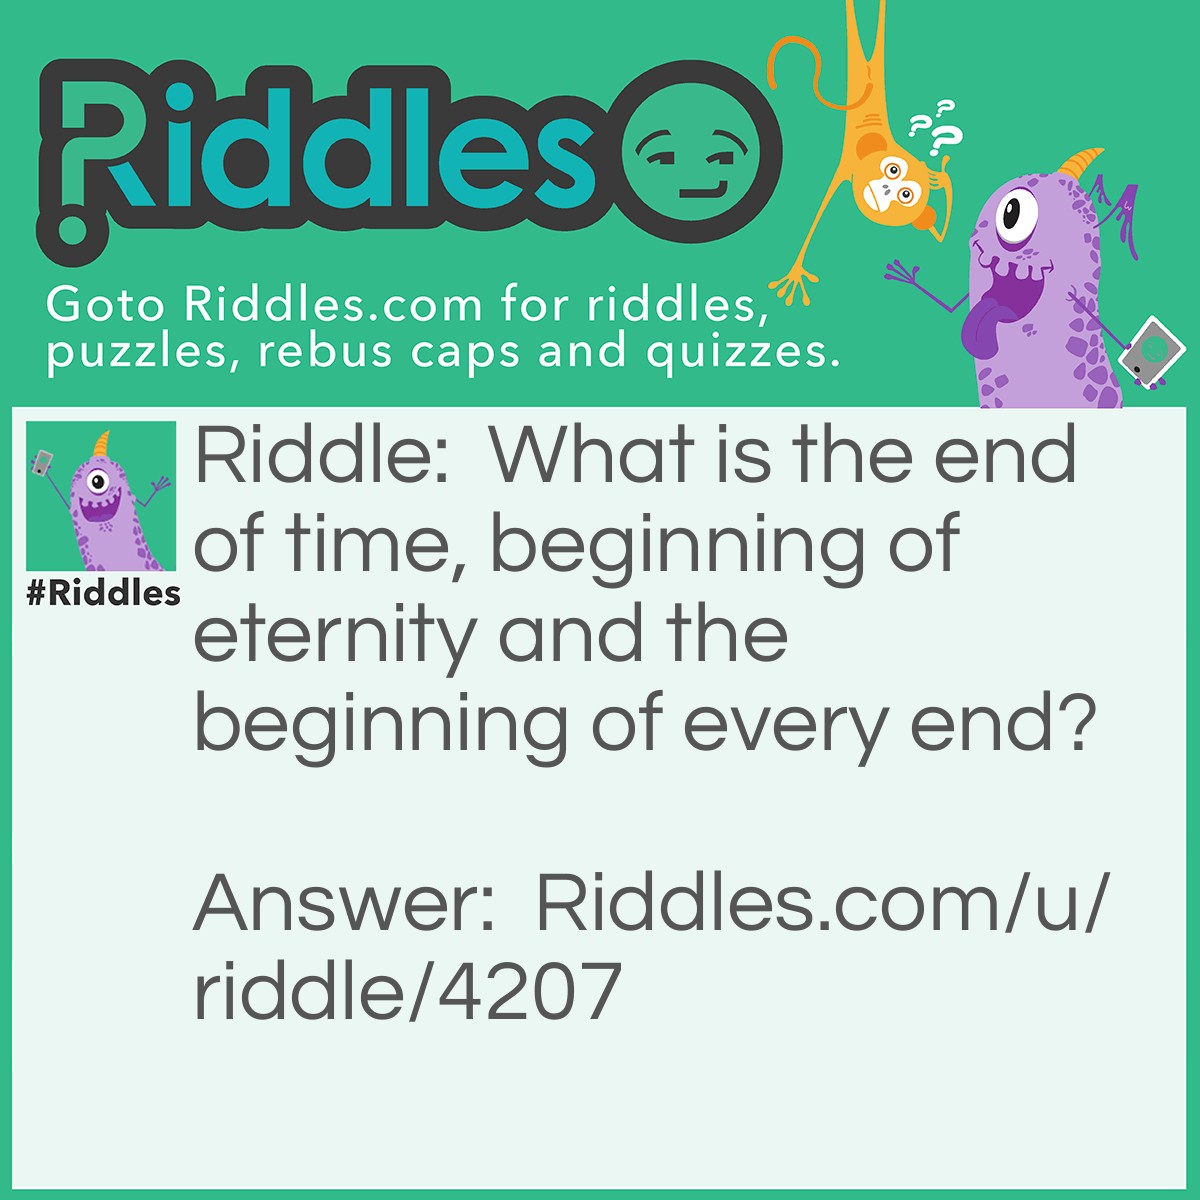 Riddle: What is the end of time, beginning of eternity and the beginning of every end? Answer: The letter E.